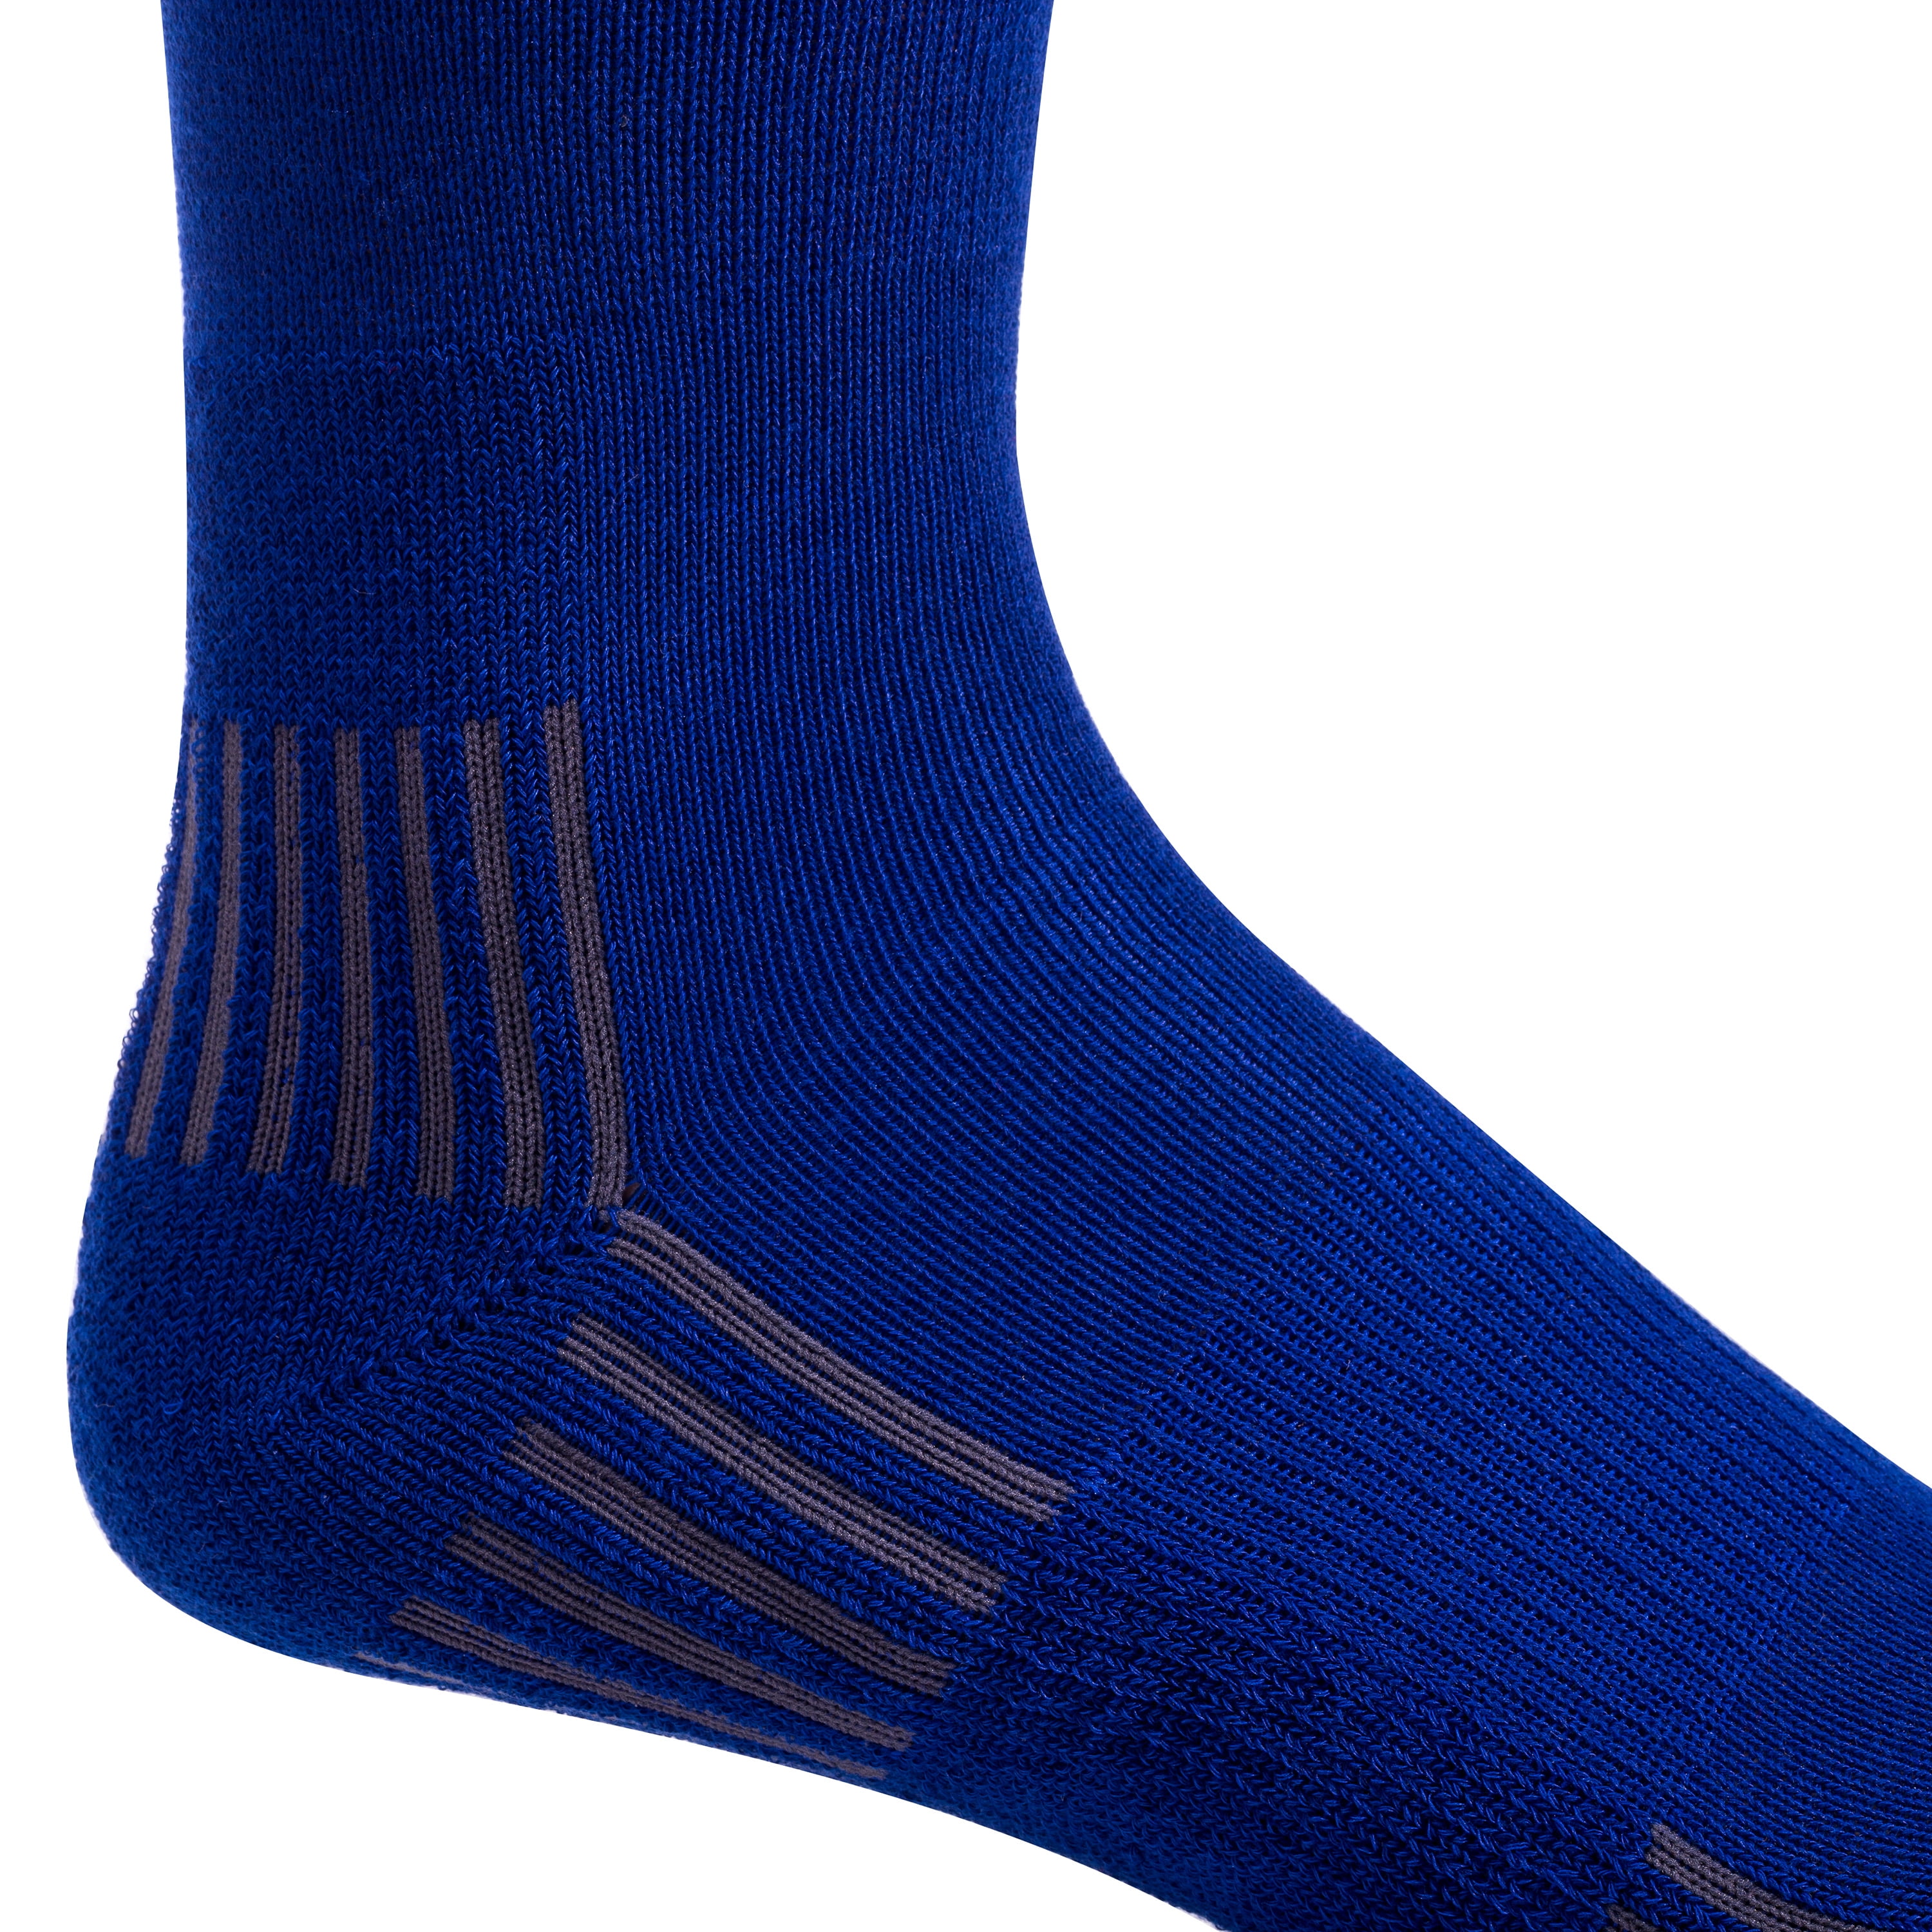 Franklin Sports Youth Baseball Socks Perfect for Baseball Renewed All Sizes and Colors Softball and More 